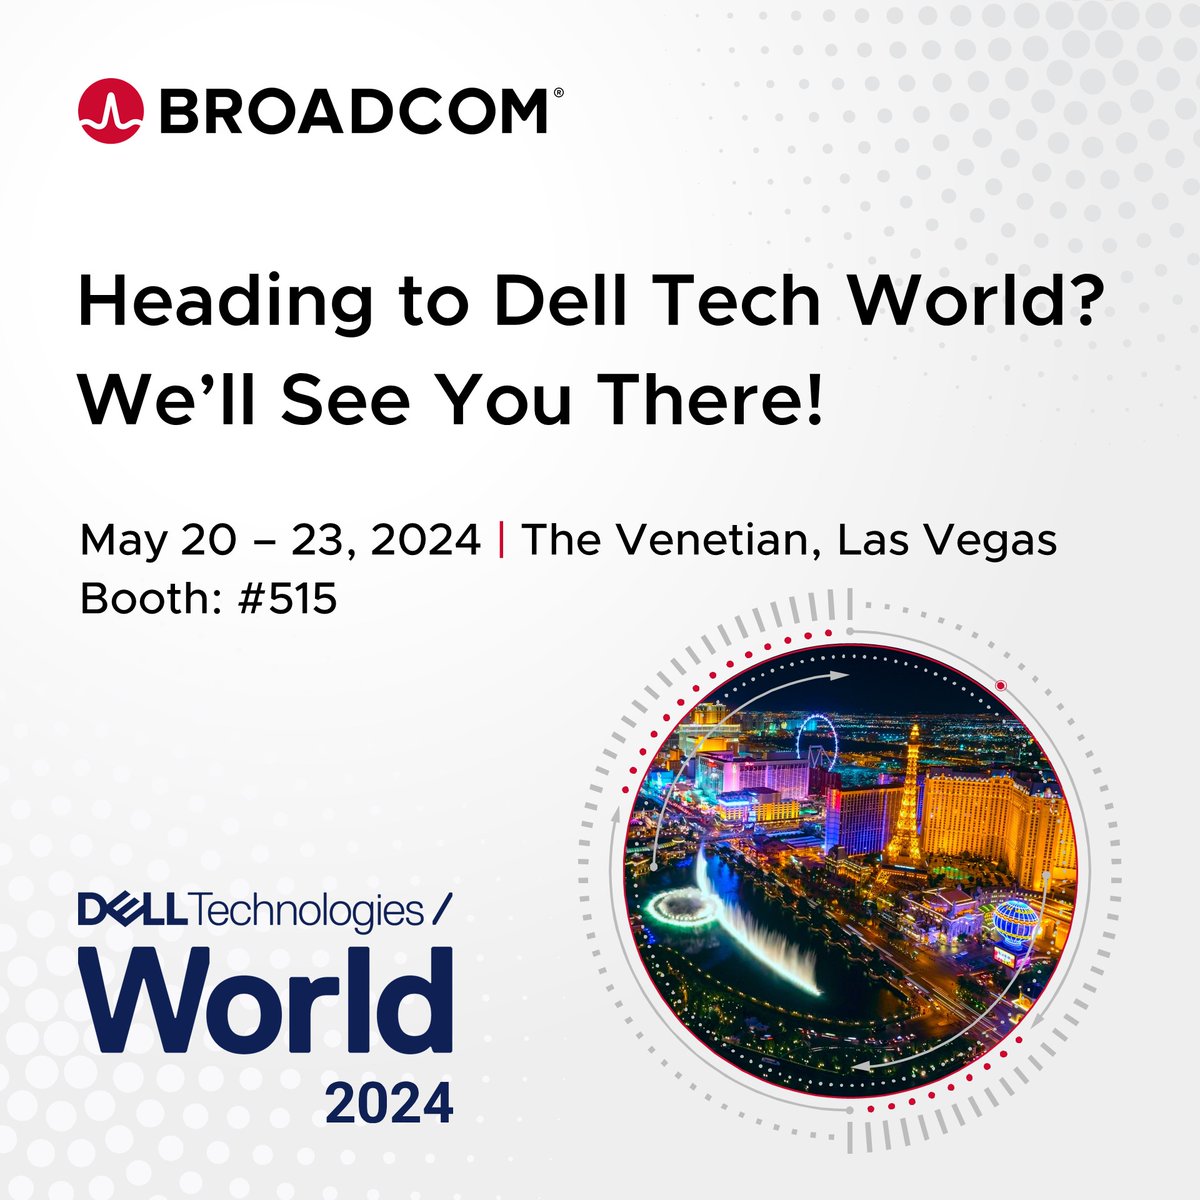 We’re sponsoring #DellTechWorld 2024 in Las Vegas. Register today and stop by to say hi at Booth #515. 👋